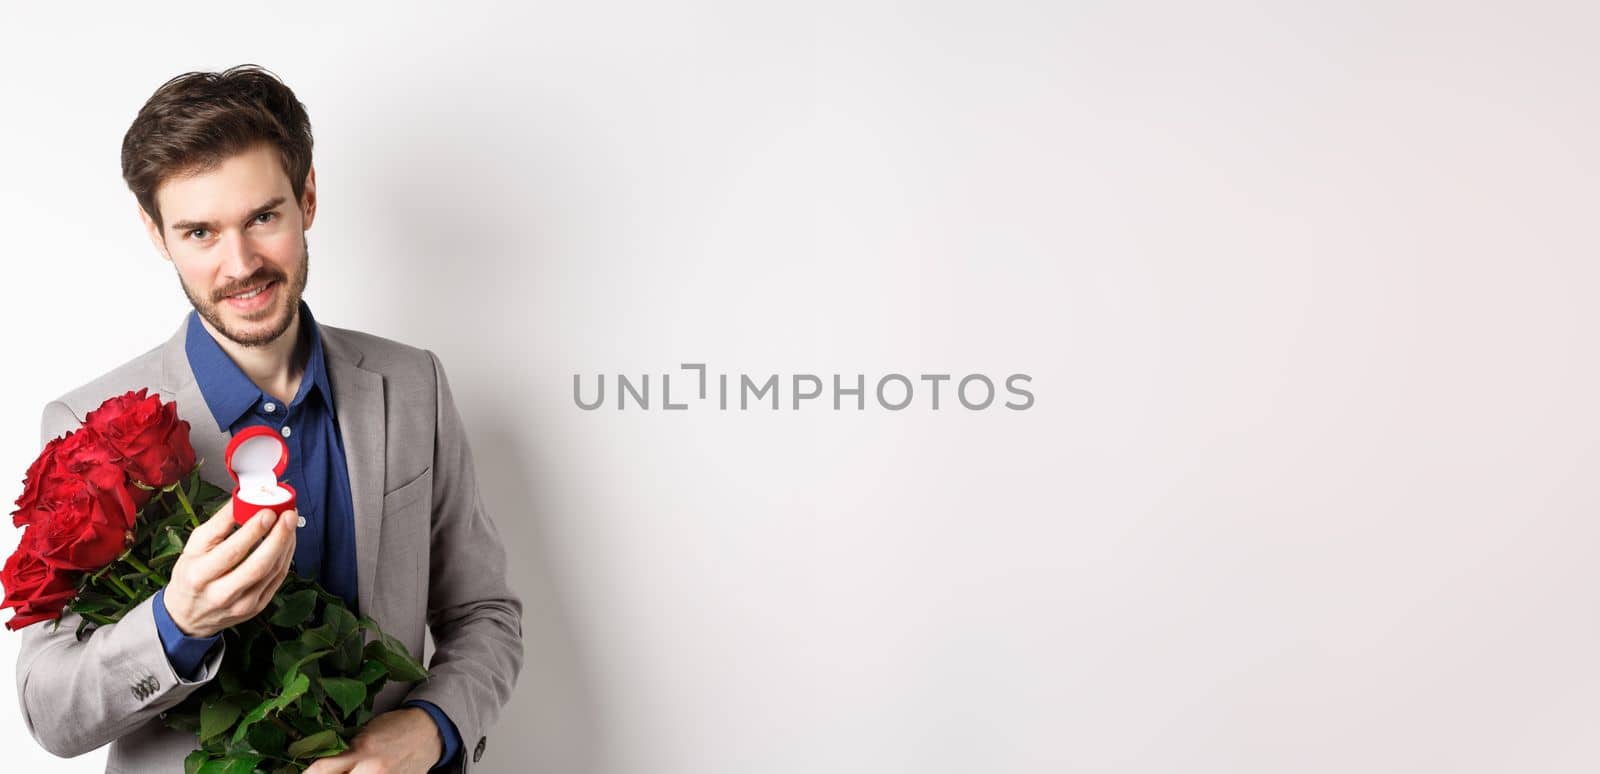 Romantic man with boquet of red roses asking to marry him, holding engagement ring and looking confident at camera, standing in suit over white background by Benzoix